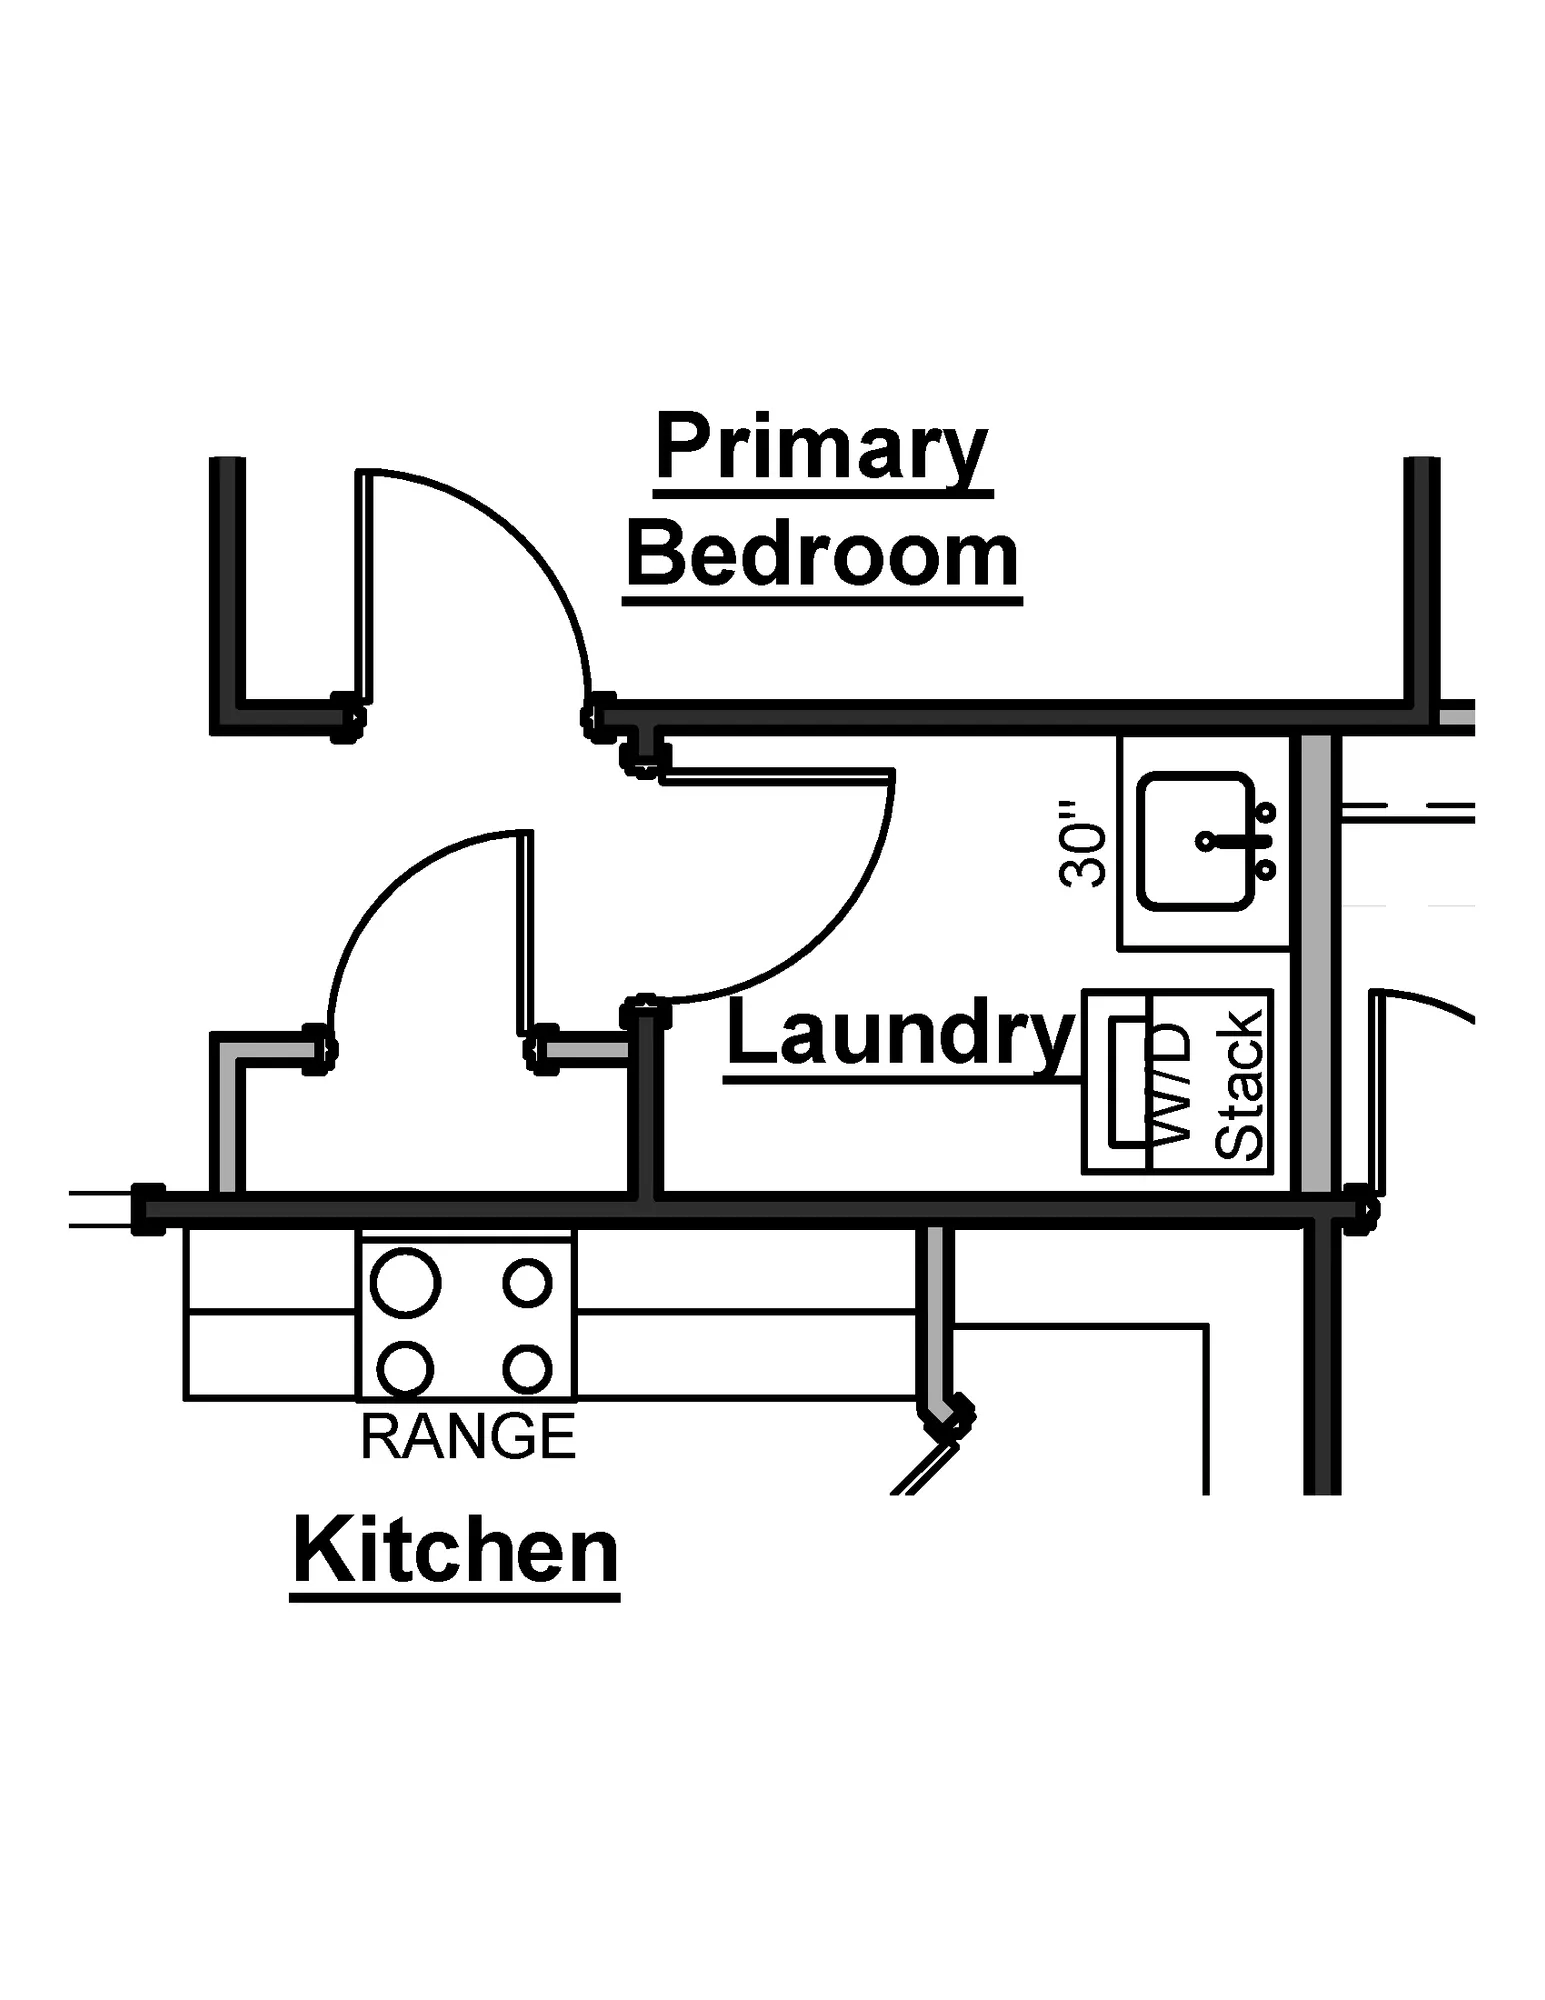 Laundry Sink Option with Washer Dryer Stack - undefined